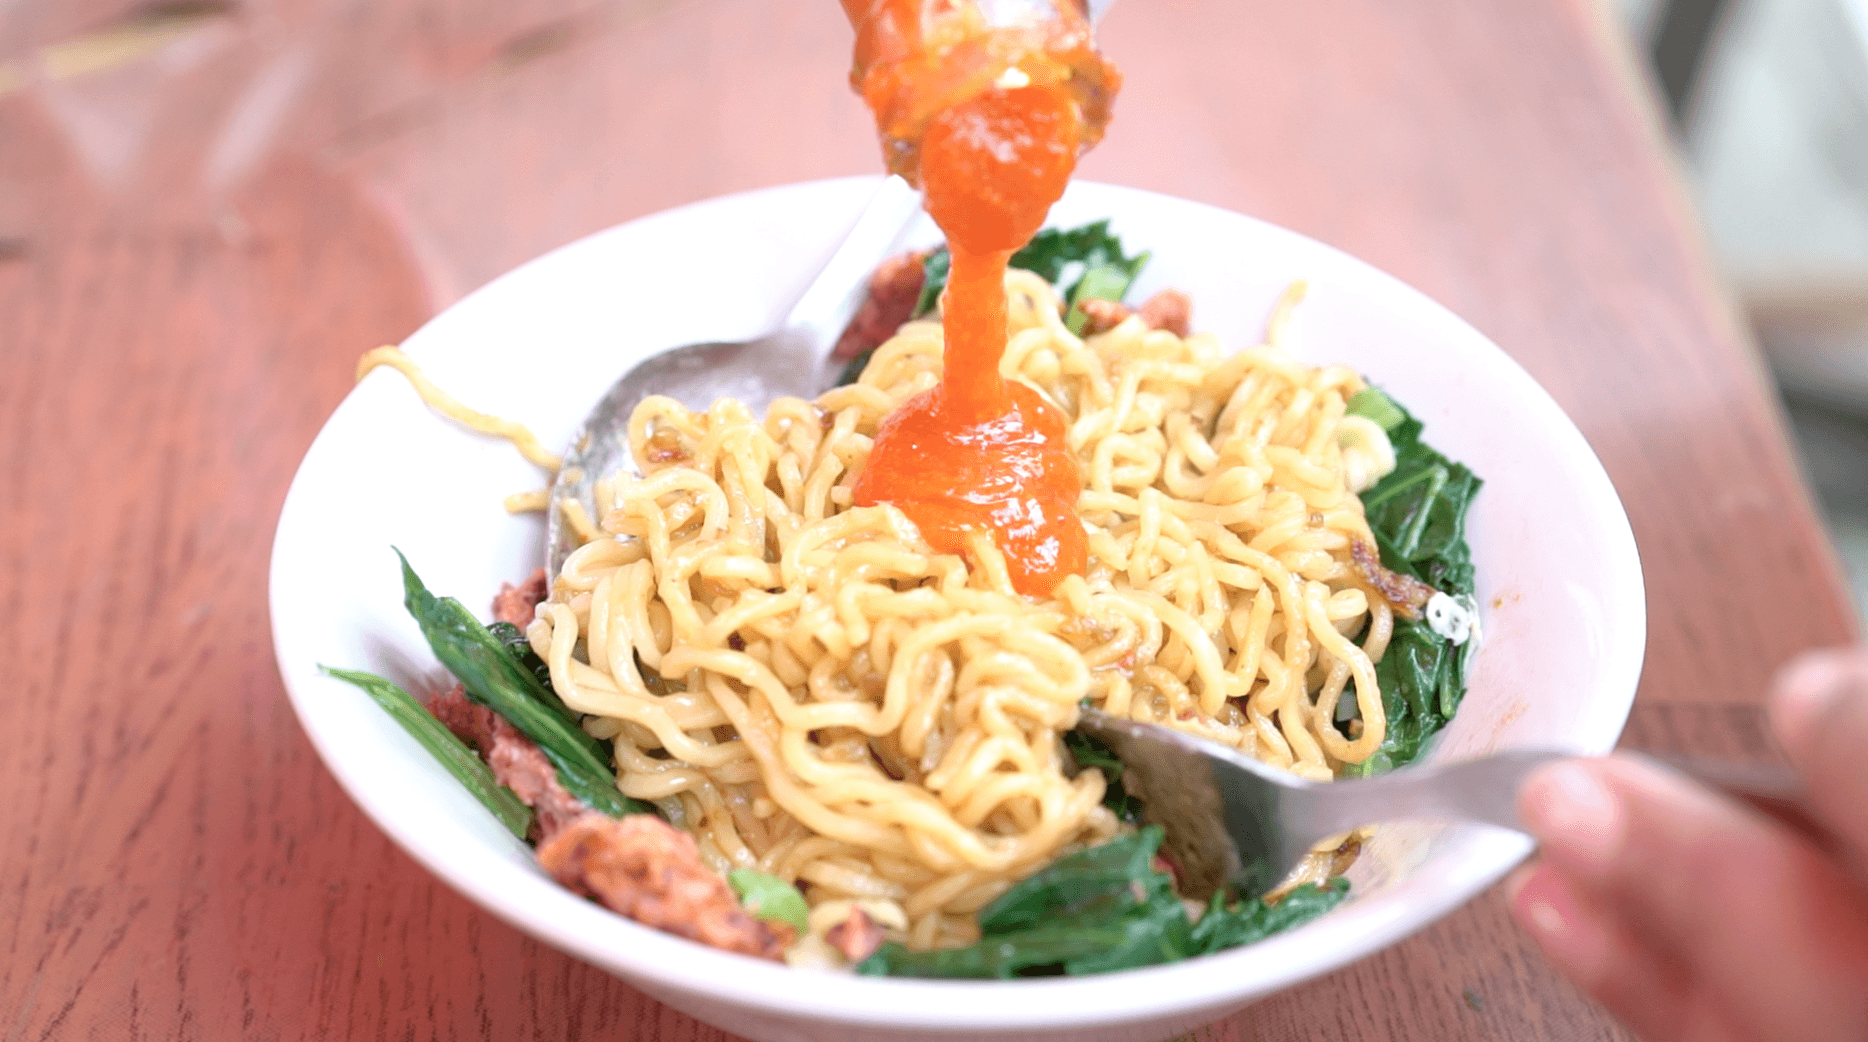 Indonesians and instant noodles: A love affair - The Jakarta Post